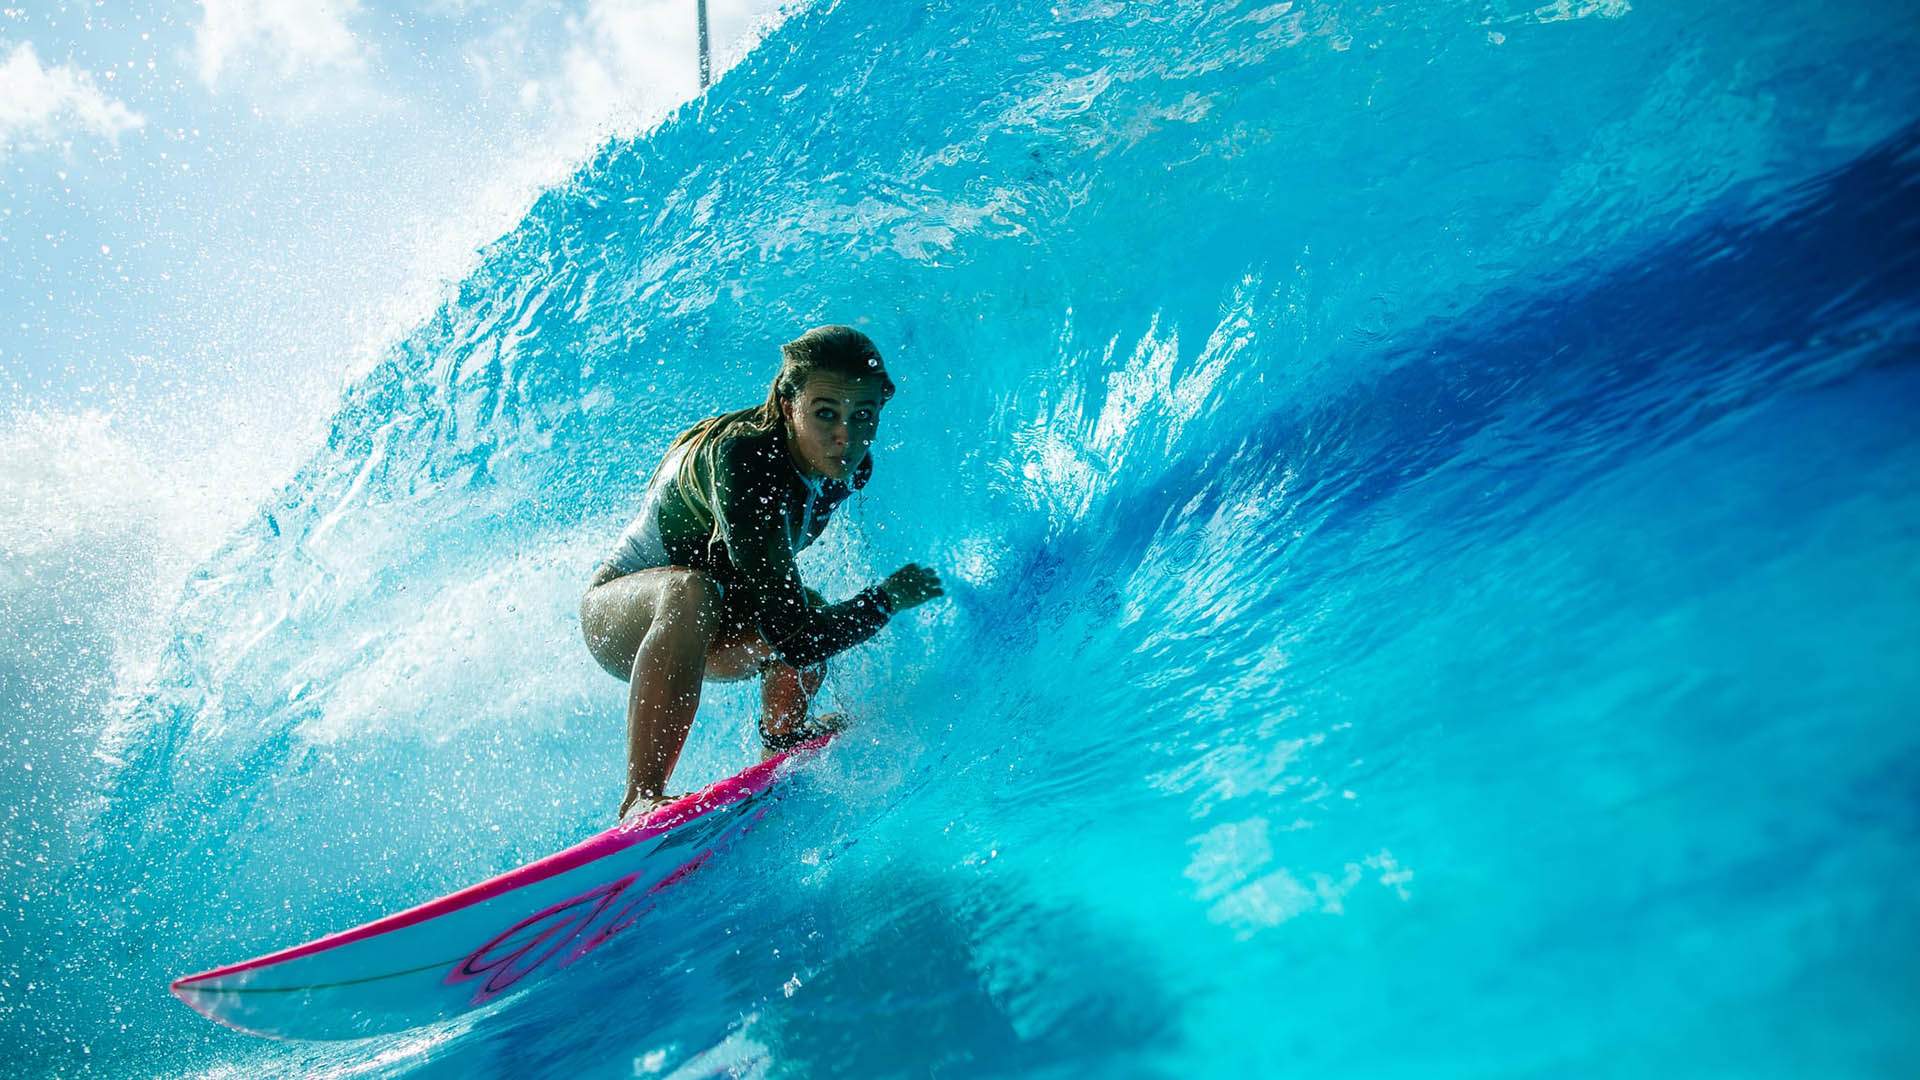 Now Open: You Can Catch Waves in a Lagoon the Size of the SCG at Sydney's First Urbnsurf Surf Park